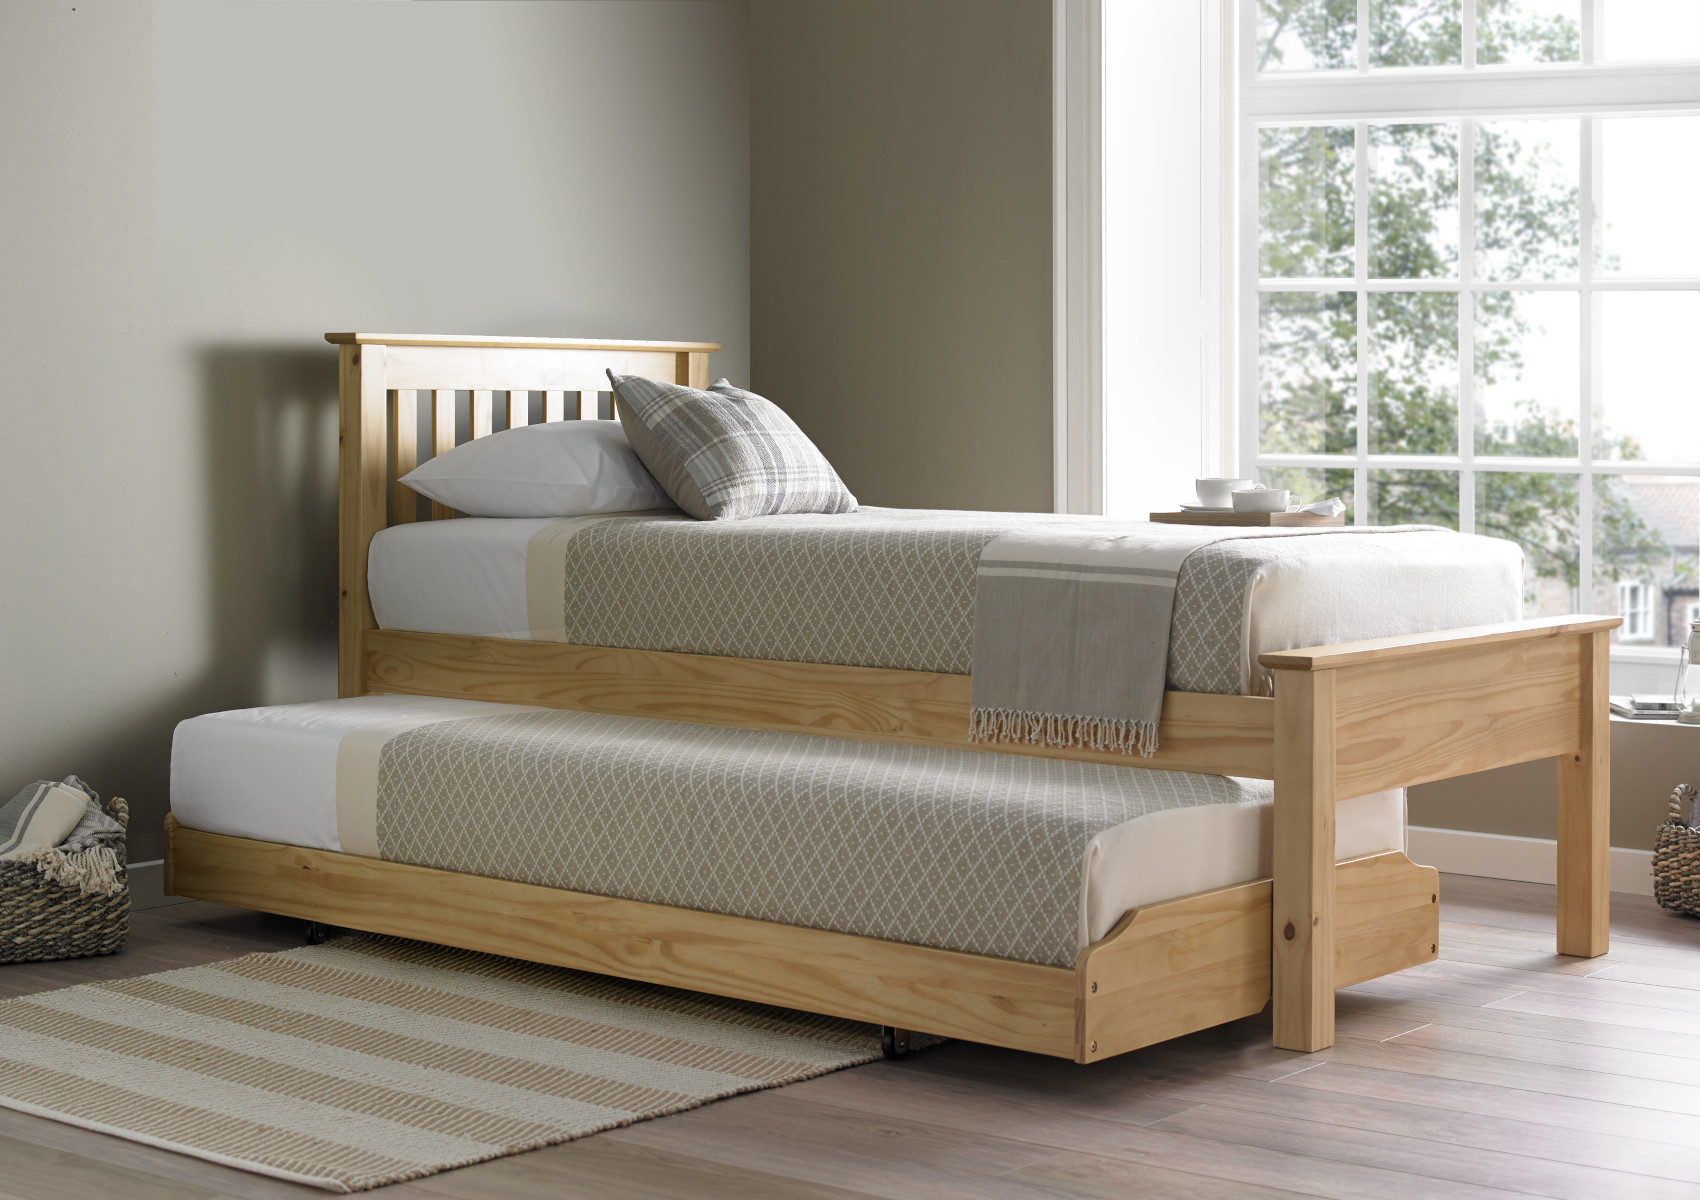 View Atlantis Oak finish Wooden Guest Bed Including Underbed Time4Sleep information